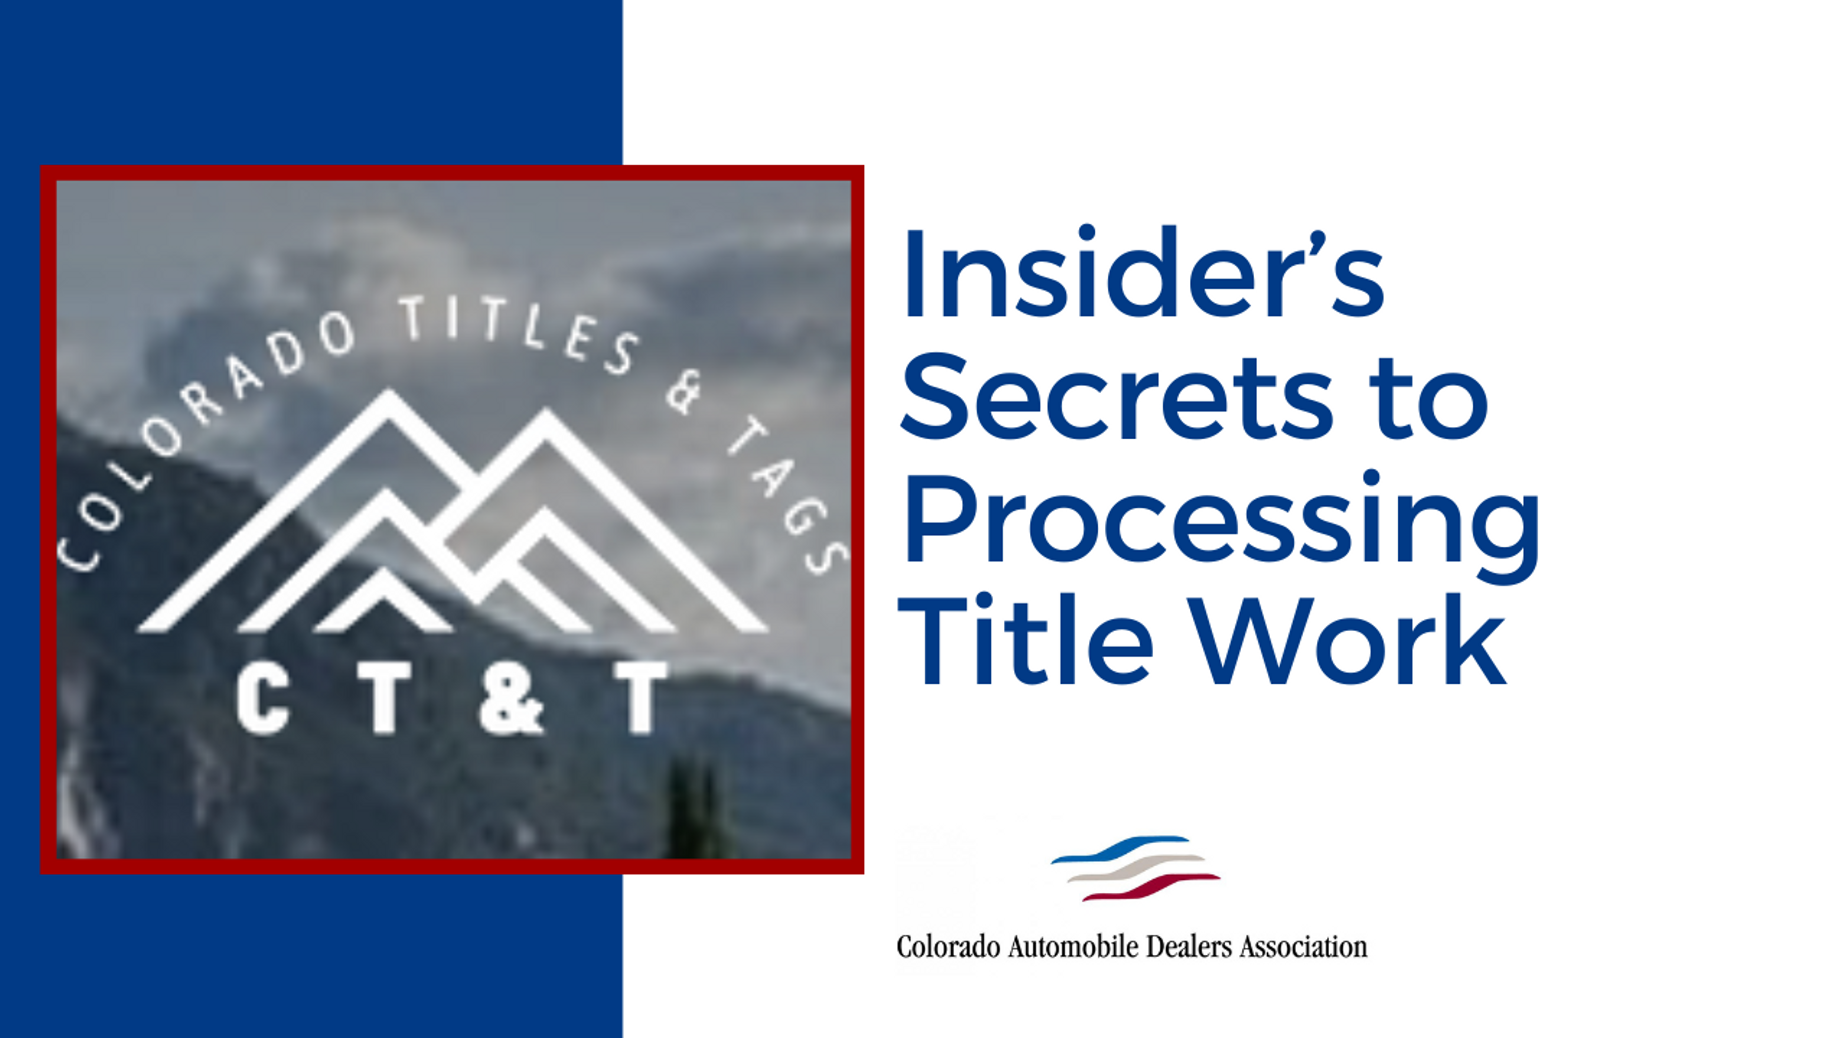 Insider's Secrets to Processing Title Work